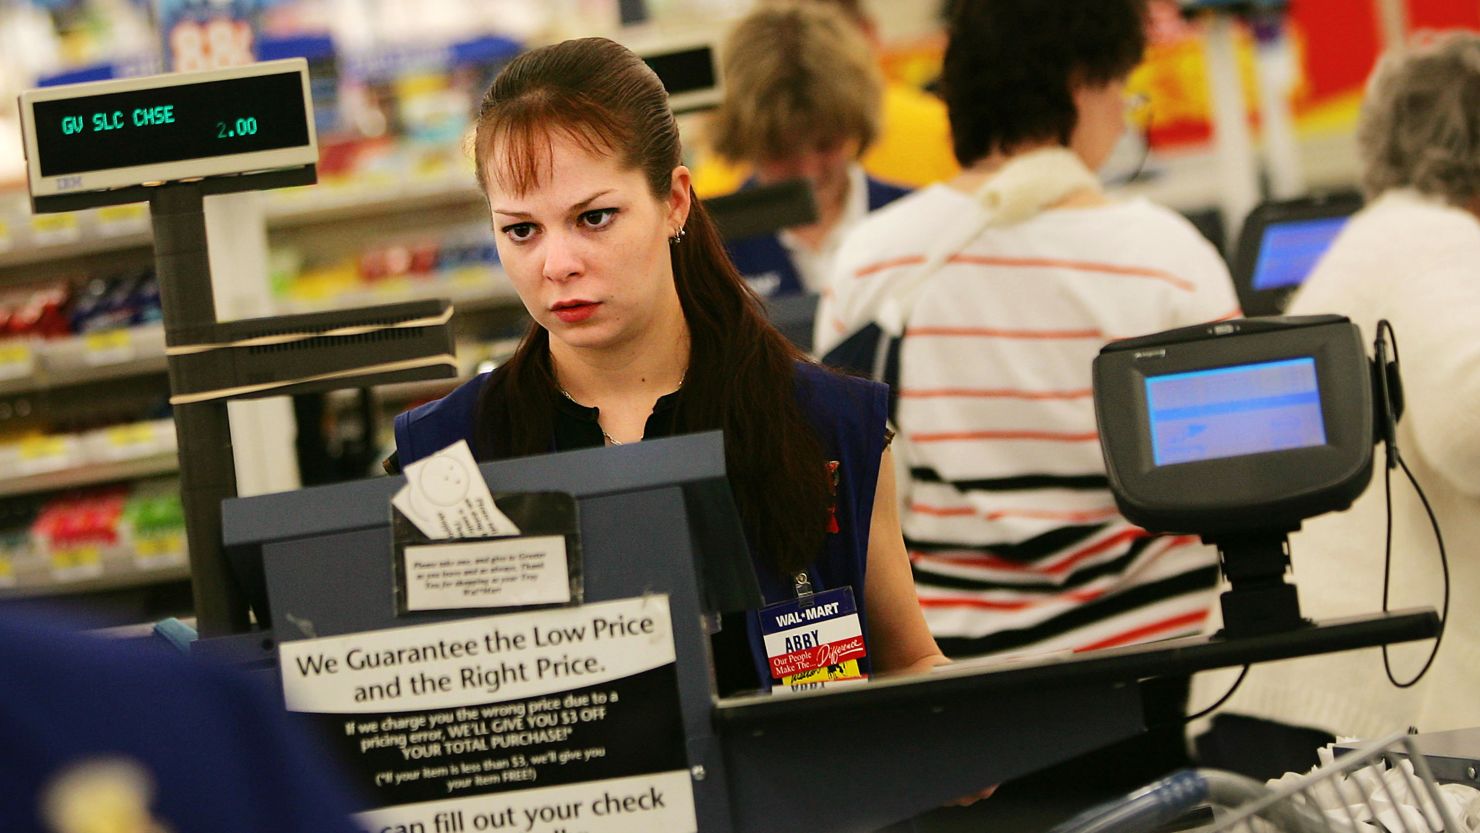 A cashier works the register at a Wal-Mart Supercenter. Nancy Pelosi and Rosa DeLauro say women and their families are struggling financially.